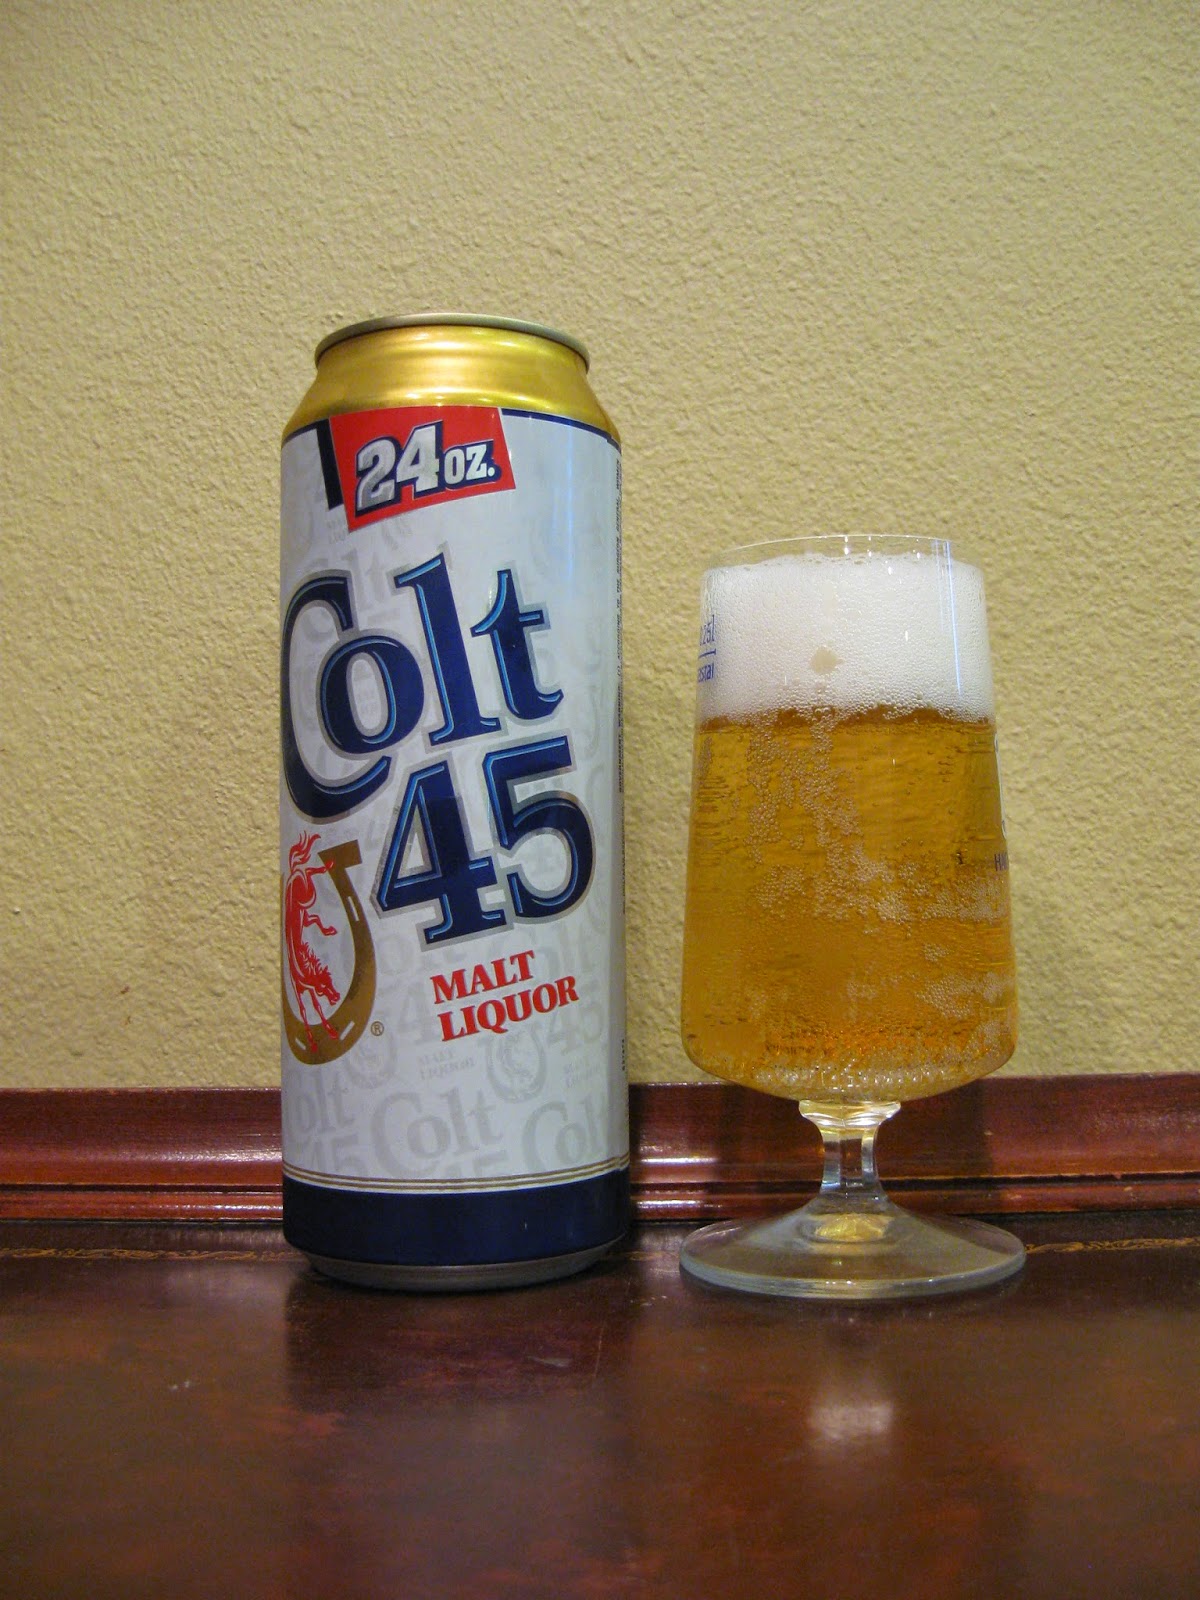 What is Colt 45 beer?